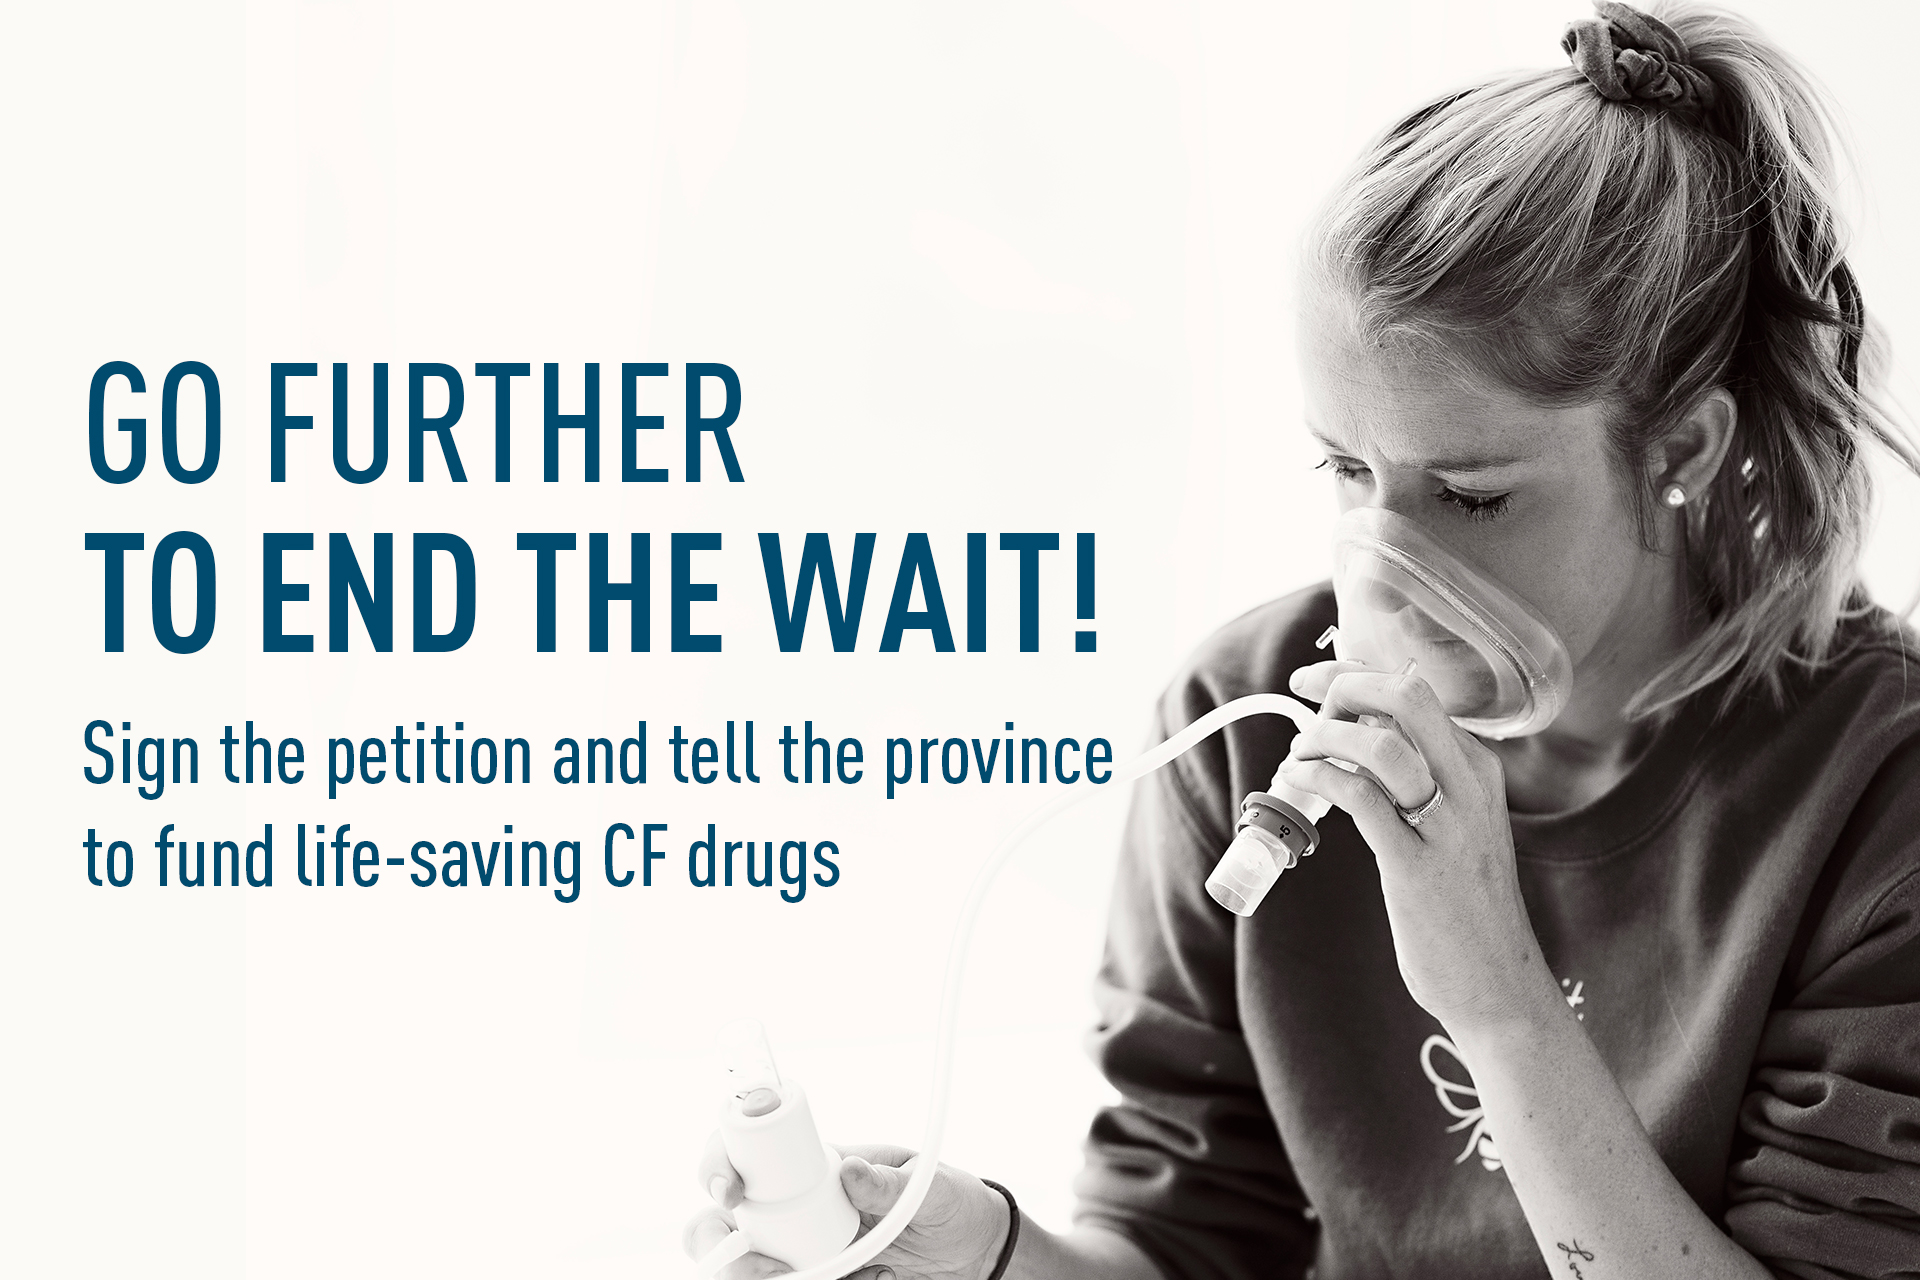 Go further to end the wait! Sign the petition and tell the province to fund life-saving drugs.